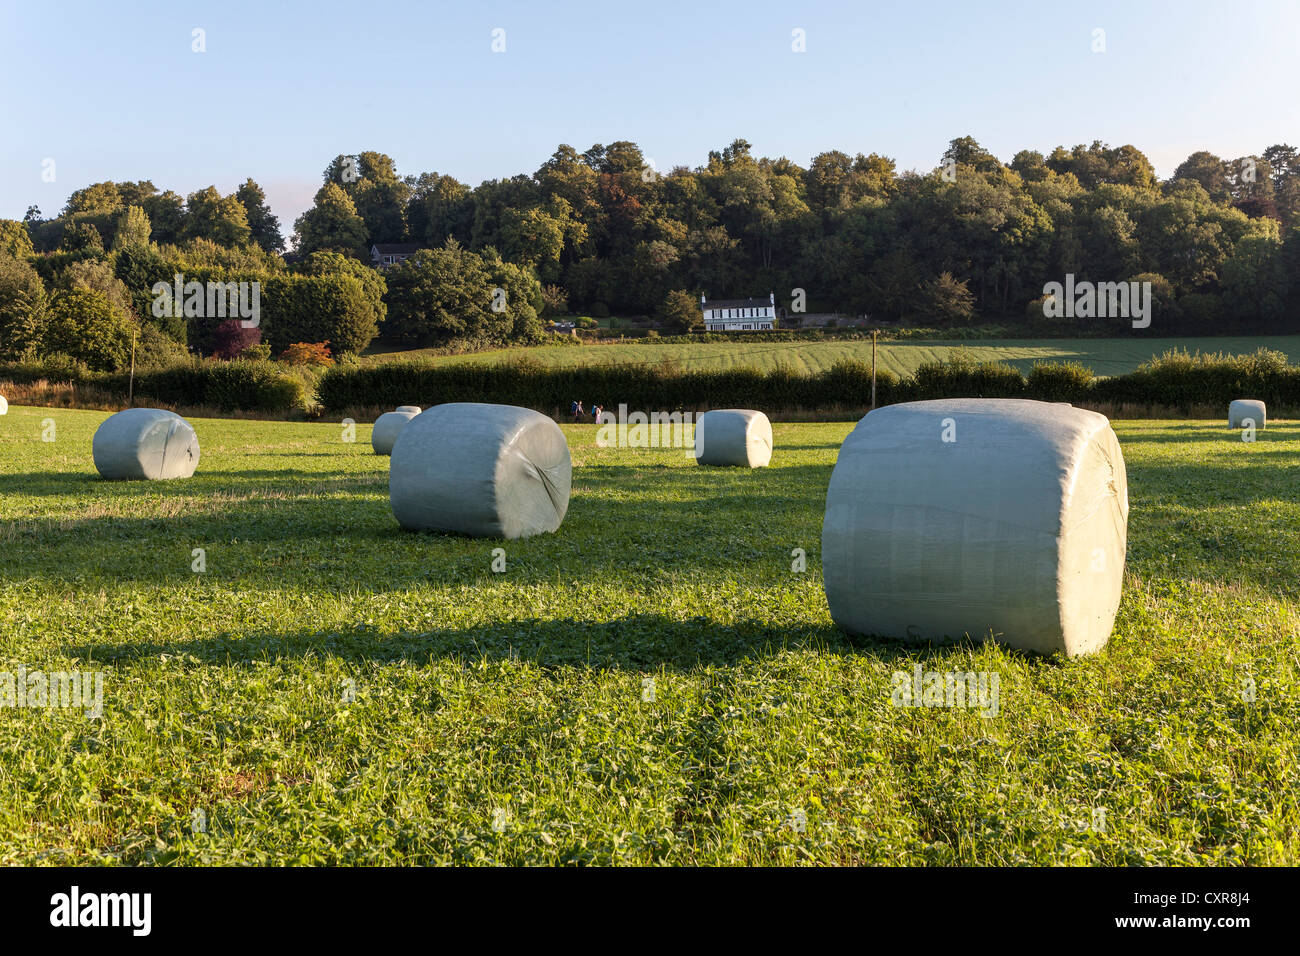 HAY BALES WRAPPED IN PLASTIC IN FIELD GLOUCESTERSHIRE ENGLAND WITH WALKERS IN BACKGROUND UK Stock Photo